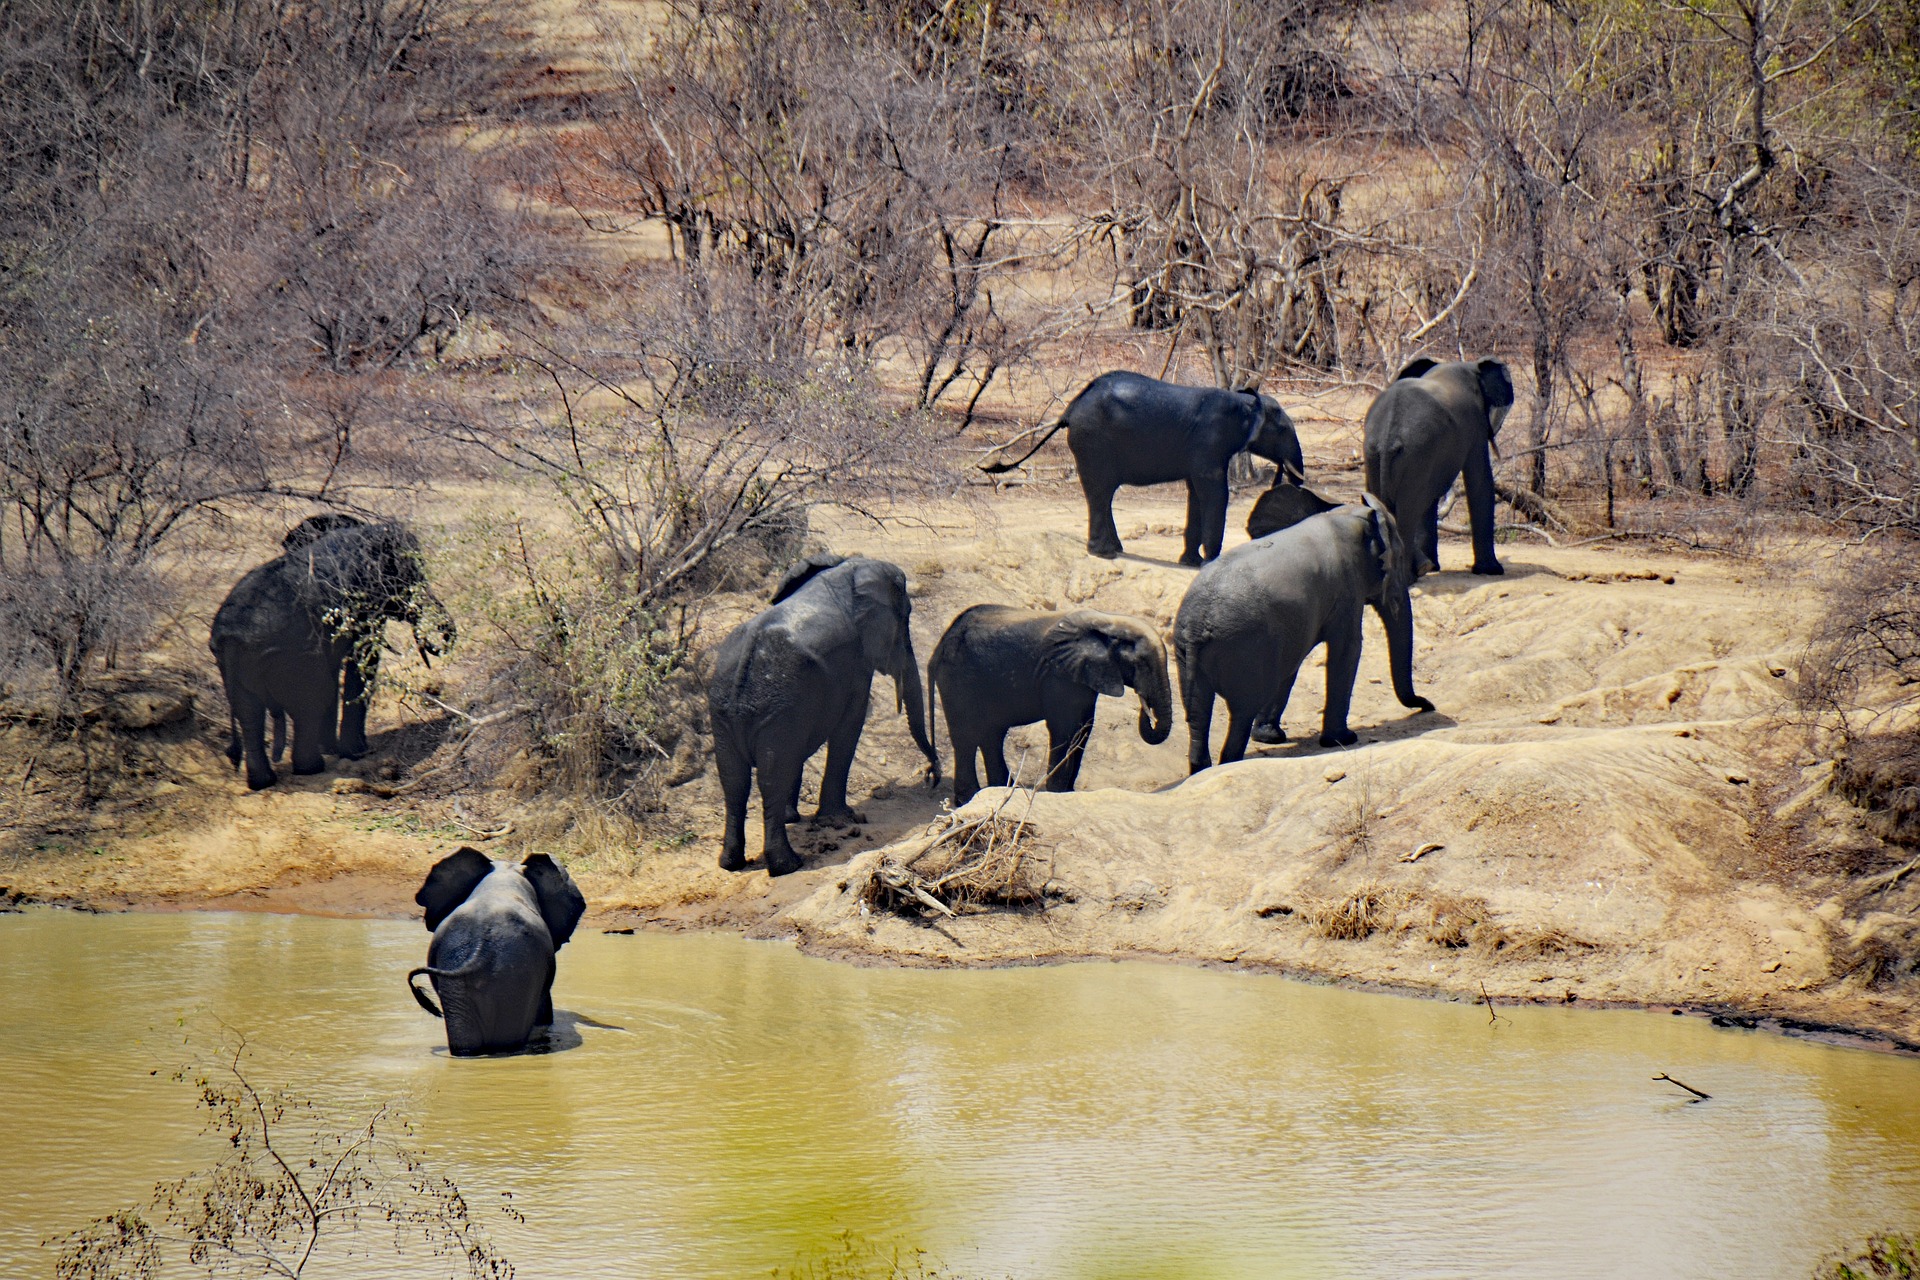 A picture of elephants near a watering hole in mole national park